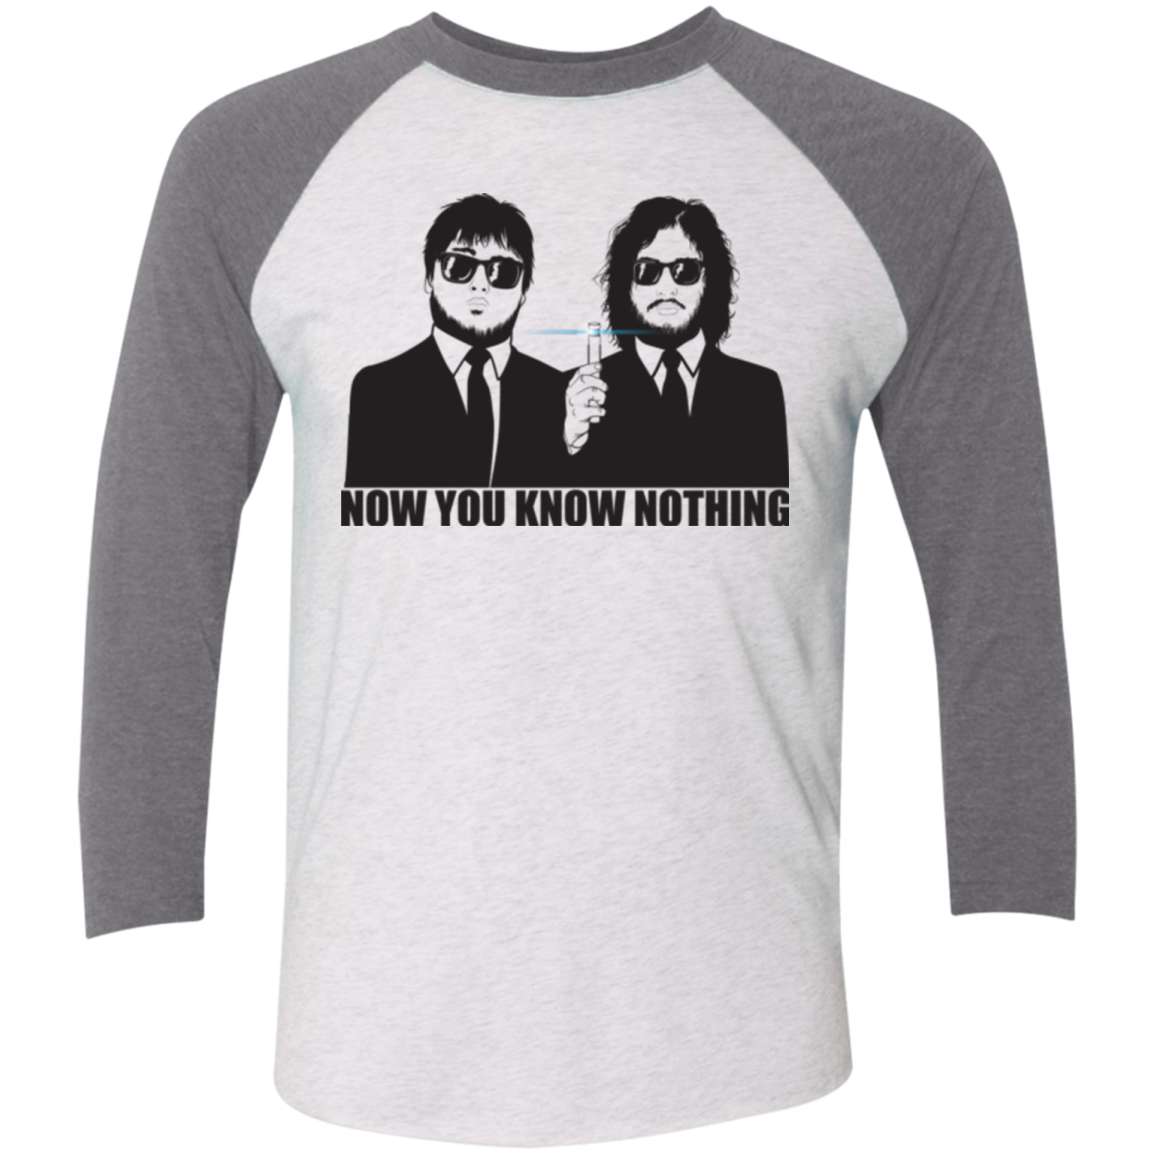 NOW YOU KNOW NOTHING Men's Triblend 3/4 Sleeve